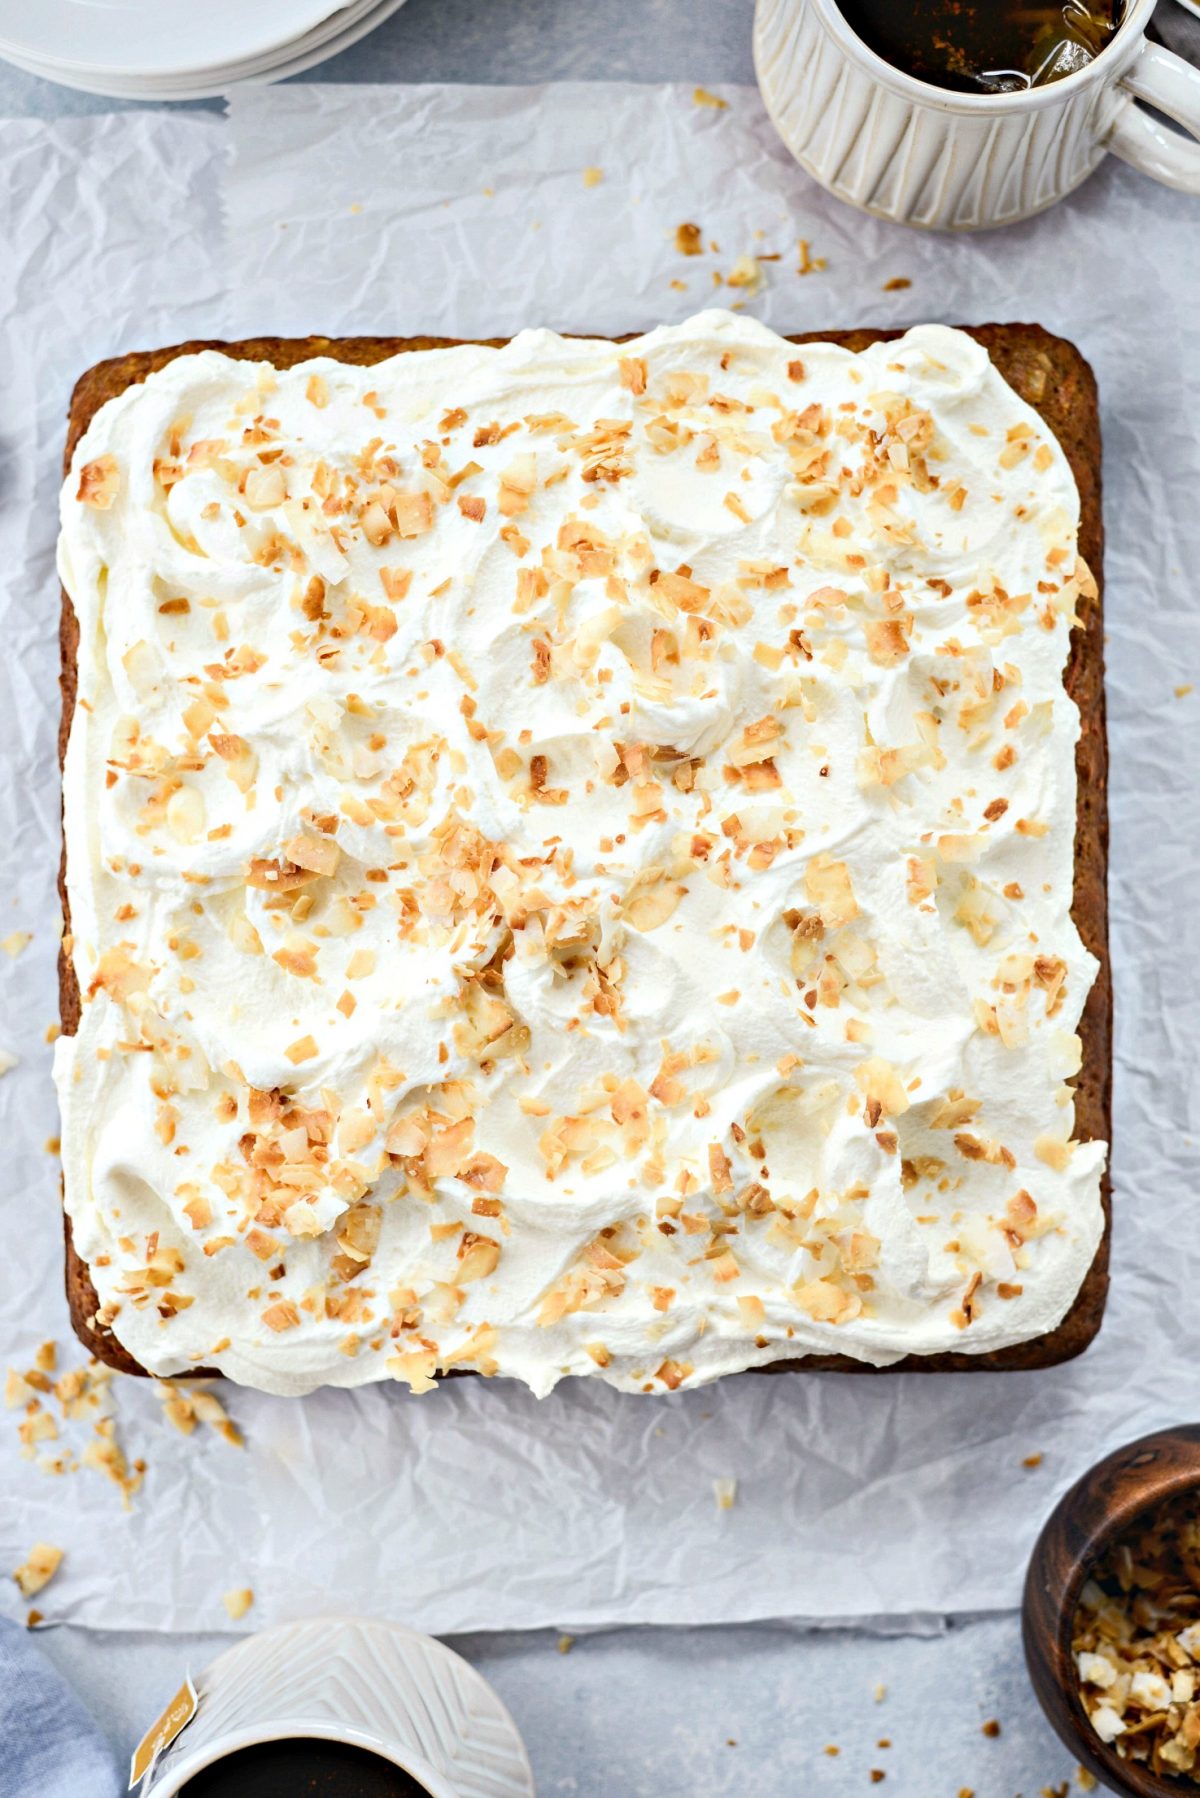 Spread mascarpone frosting and top with more toasted coconut.